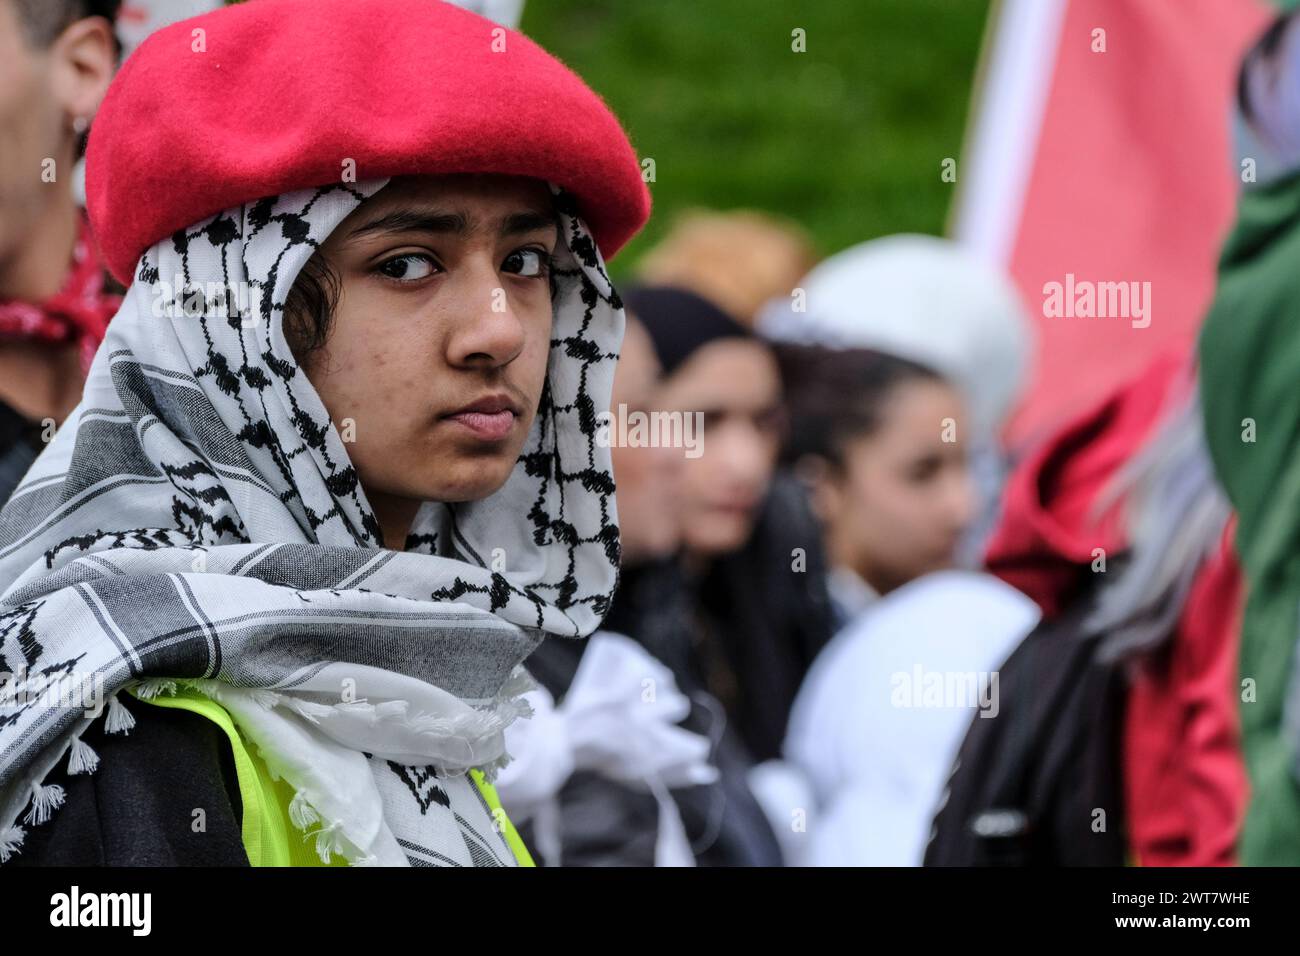 Bristol, UK. 16th Mar, 2024. A Mass Funeral Procession in Bristol to mourn and honour the many men, women and children who have died in the current Israel Gaza conflict. Credit: JMF News/Alamy Live News Stock Photo